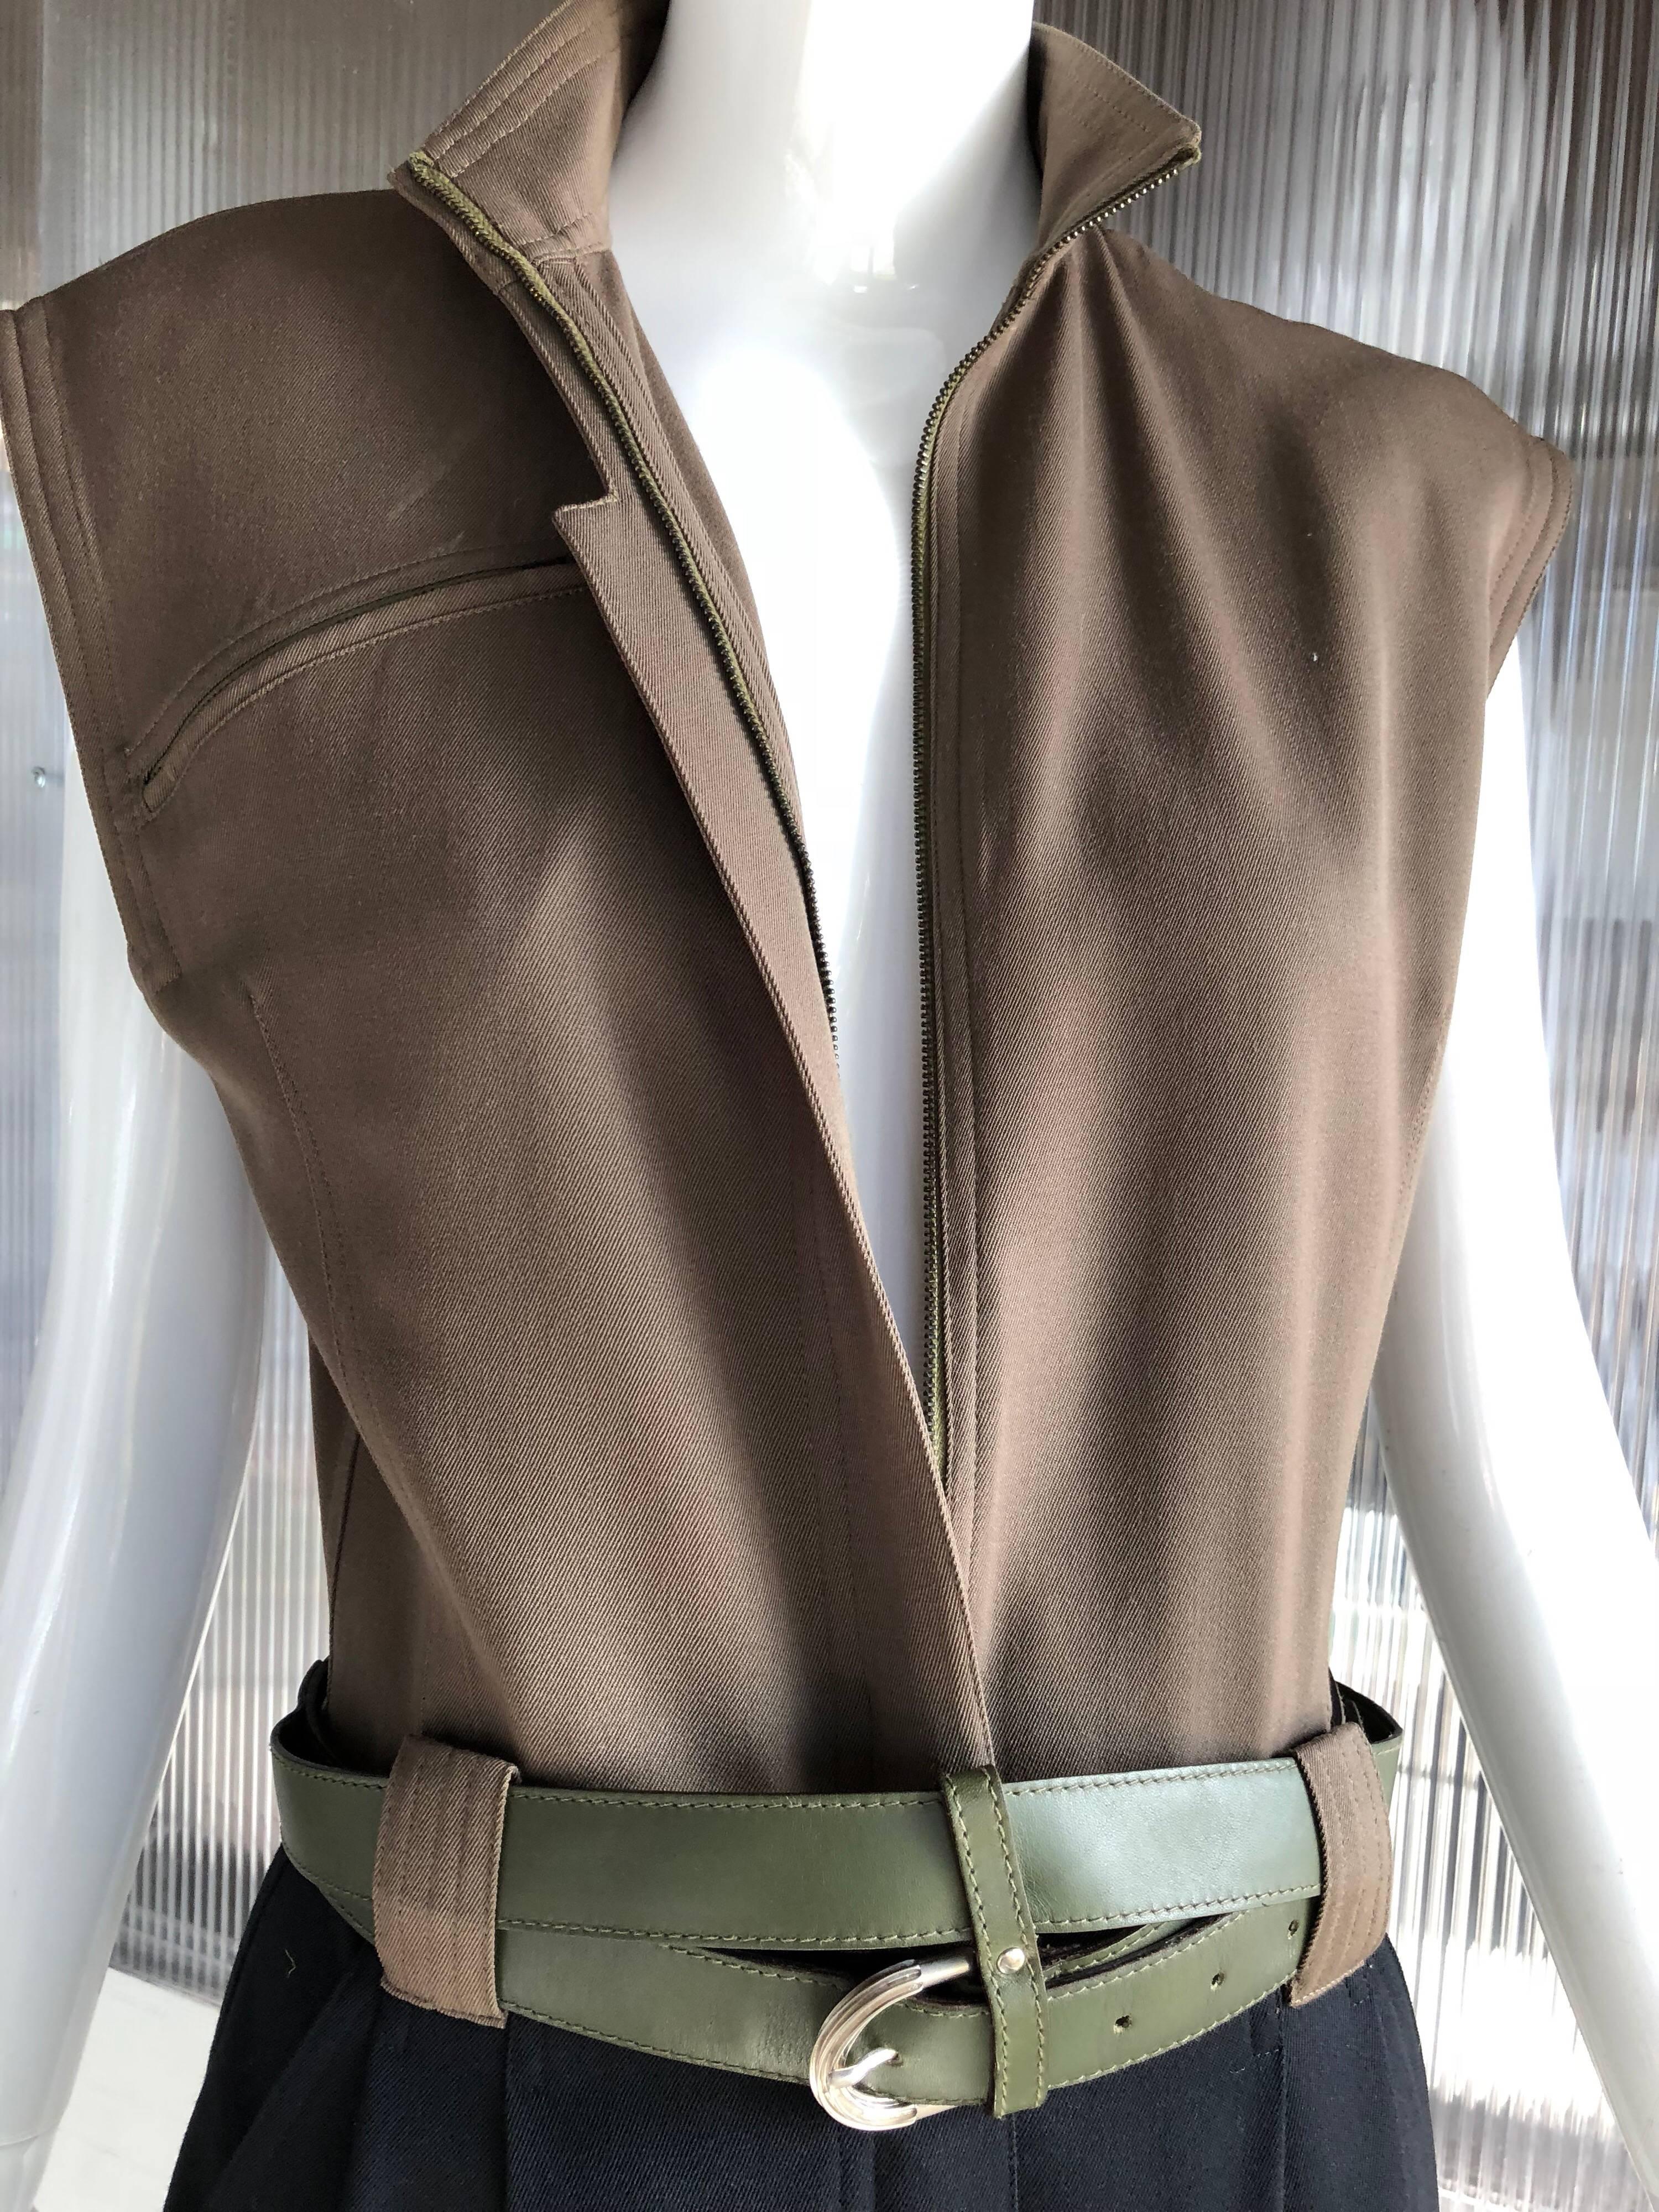 A wonderful 1980s Gianni Versace 2-tone gabardine jumpsuit in black and army green gabardine. Featured with a Gianni Versace olive green double wrap belt. Pleated front, men's-style tailoring. Slightly padded shoulders. Nehru collar. Front zipper. 